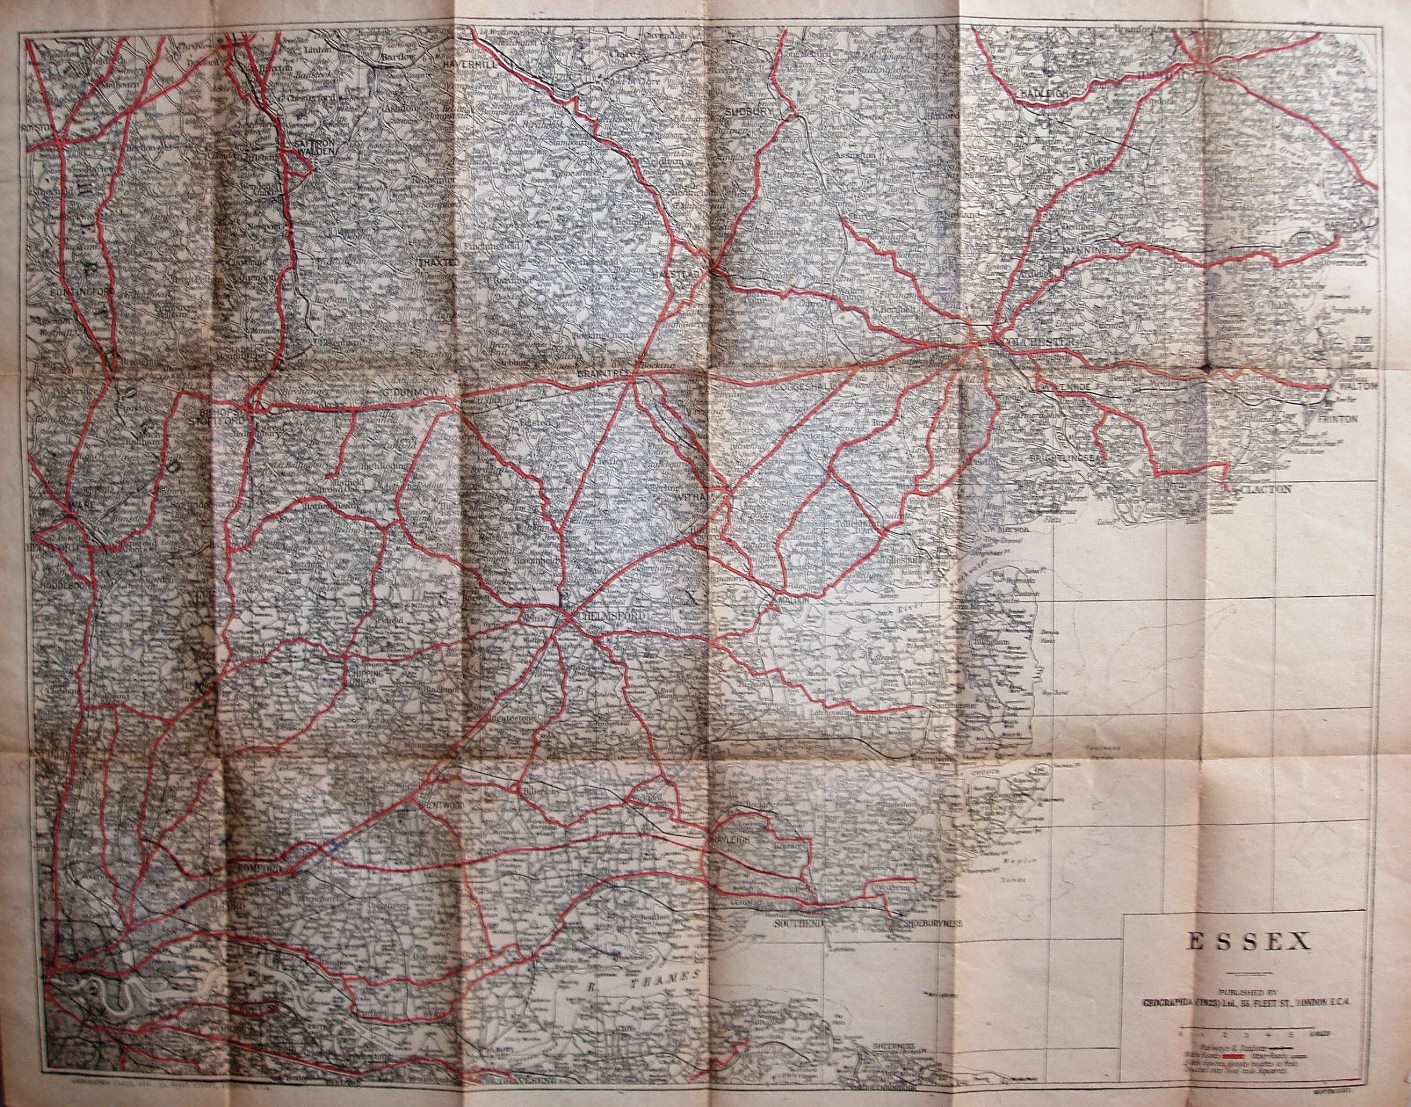 Geographia New Road Map of Essex, 1923